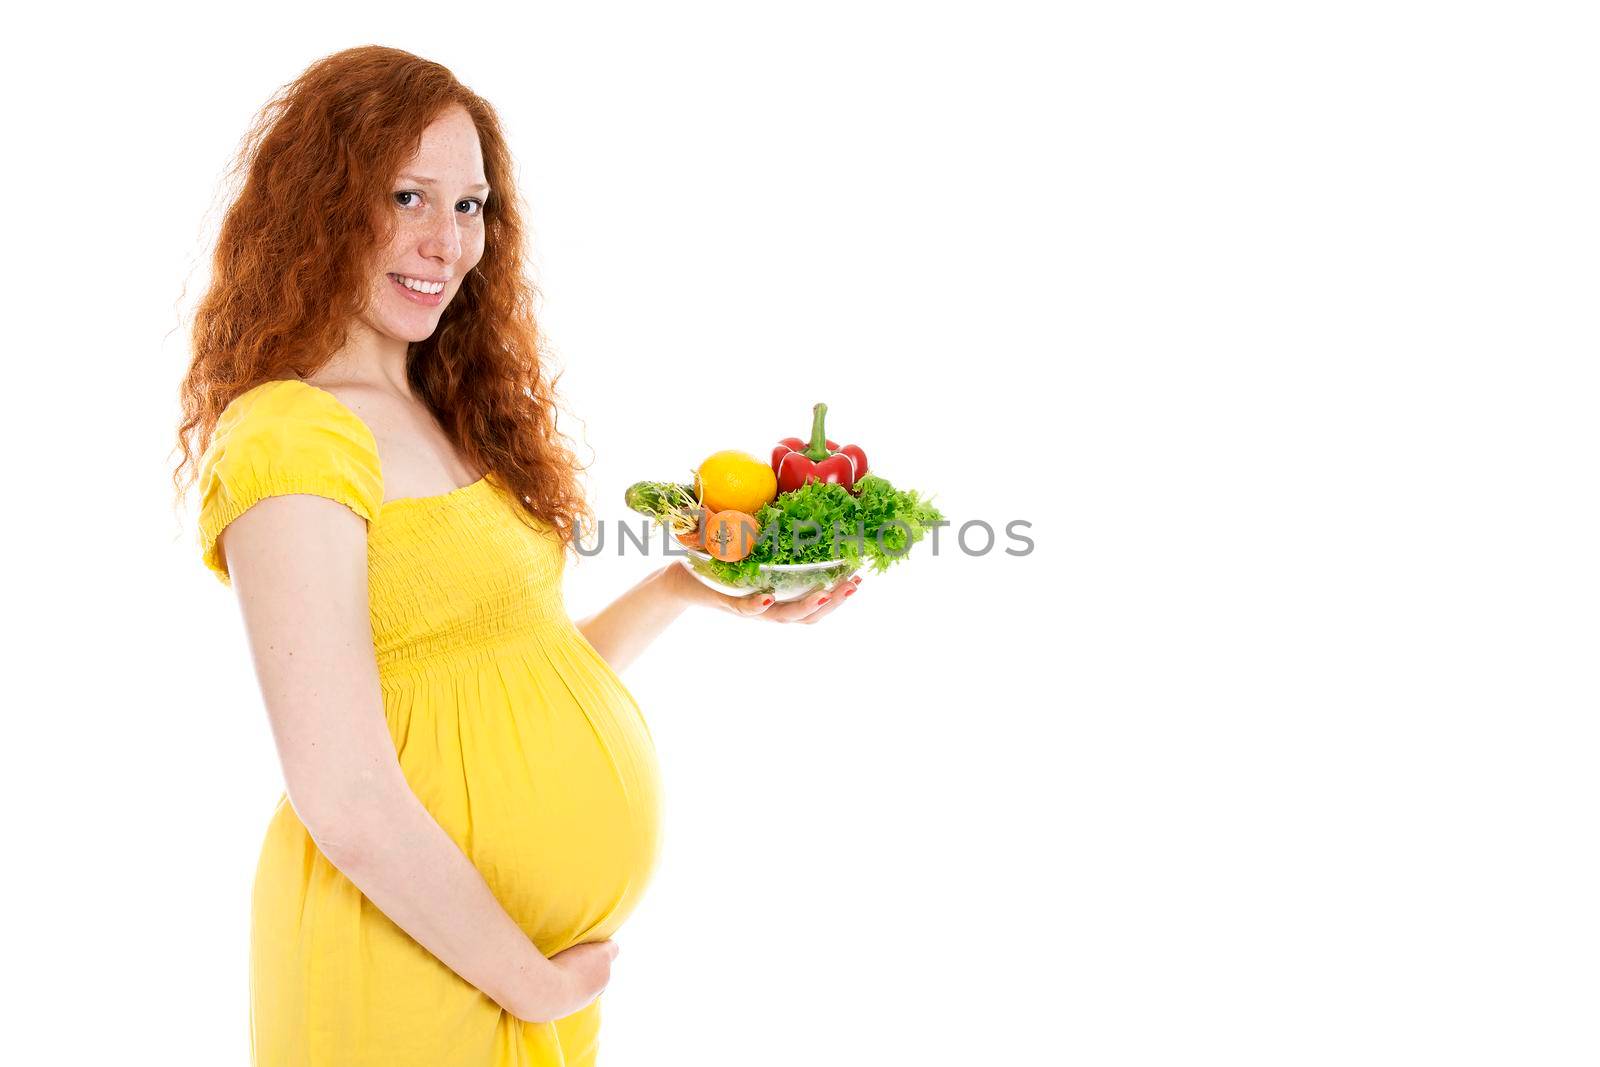 Pregnant woman holding vegetables and smiling by Jyliana